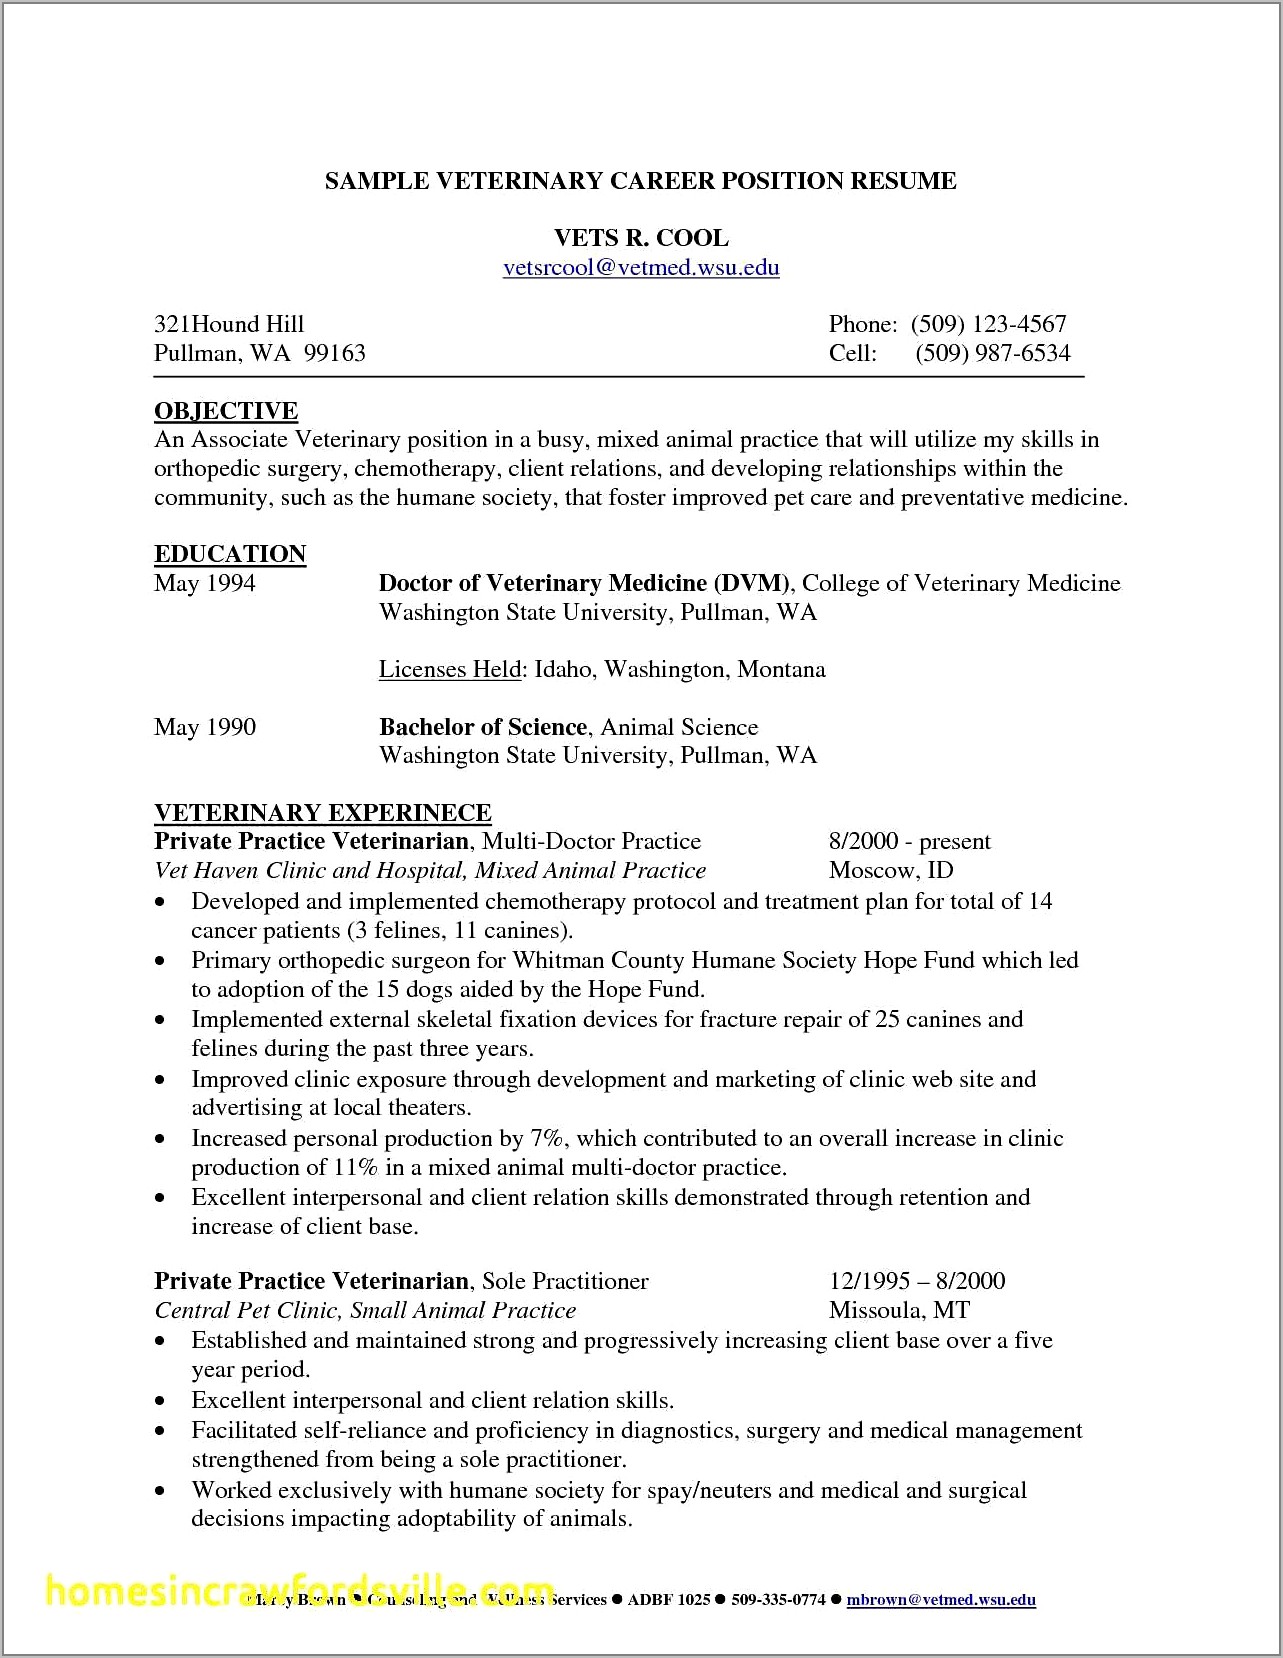 Surgical Tech Resume Samples